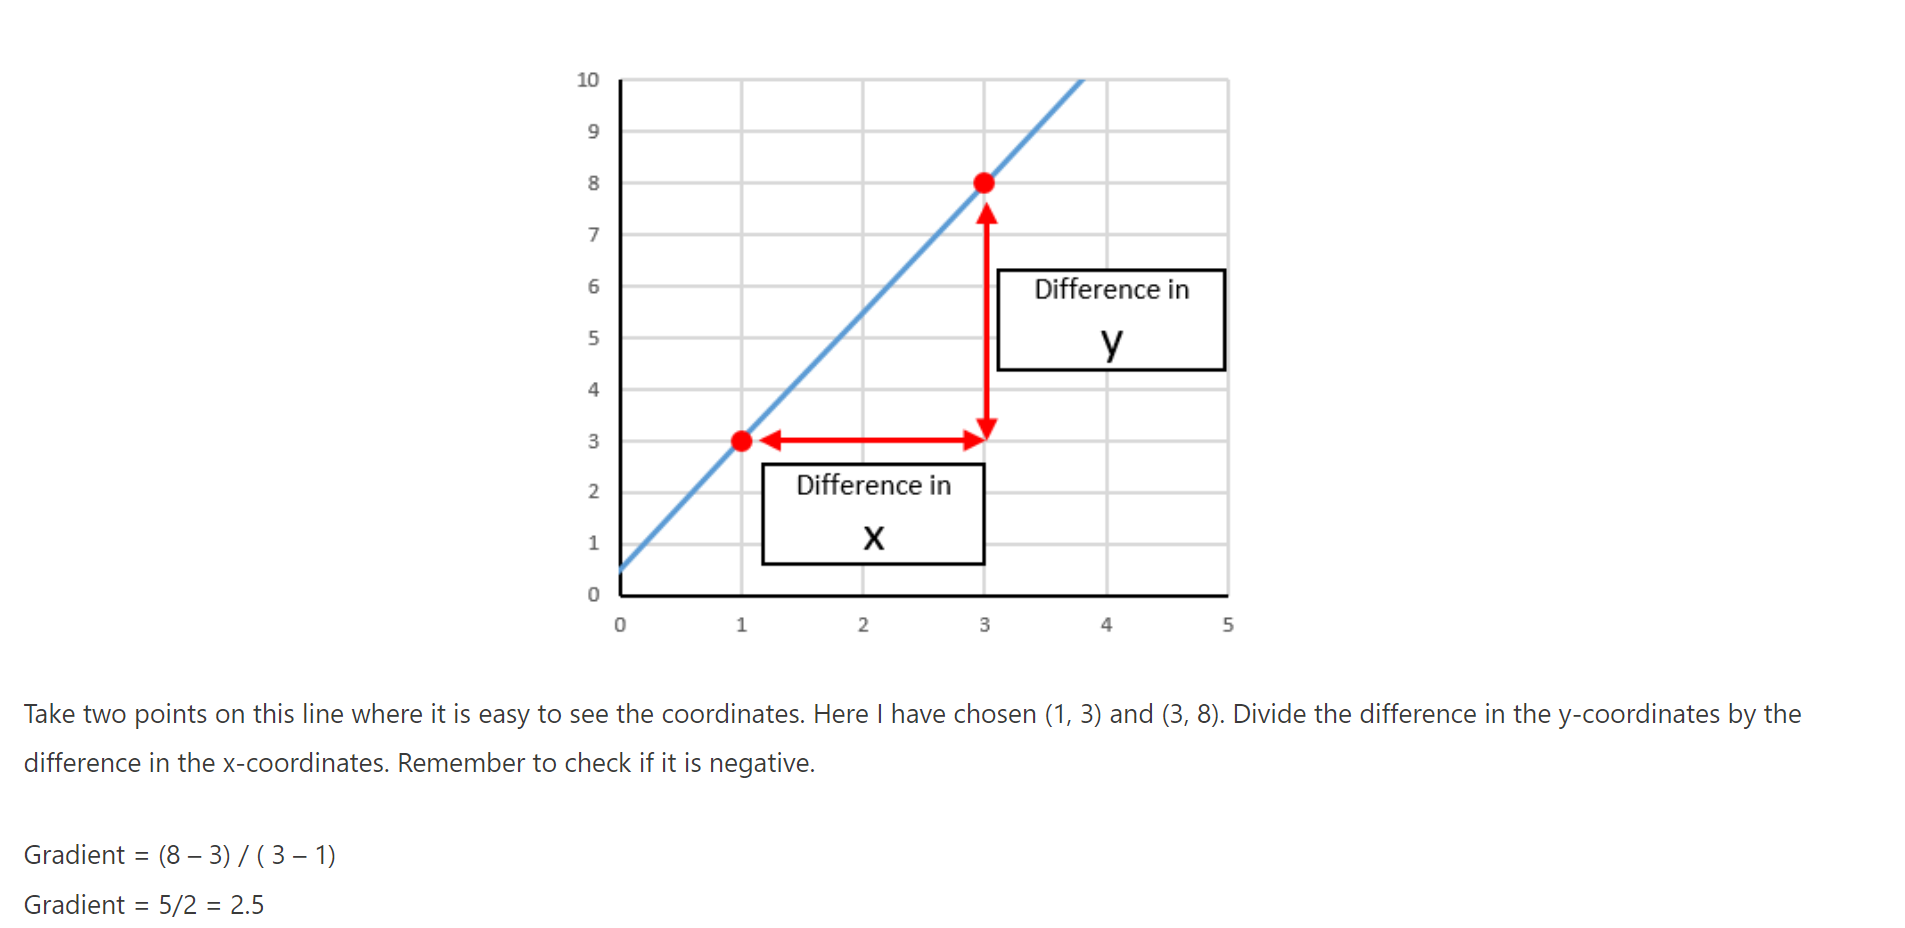 Image from https://mitchmaths.com/gcse-maths-topics/gcse-graphs-and-functions/gradient-of-a-graph/#: